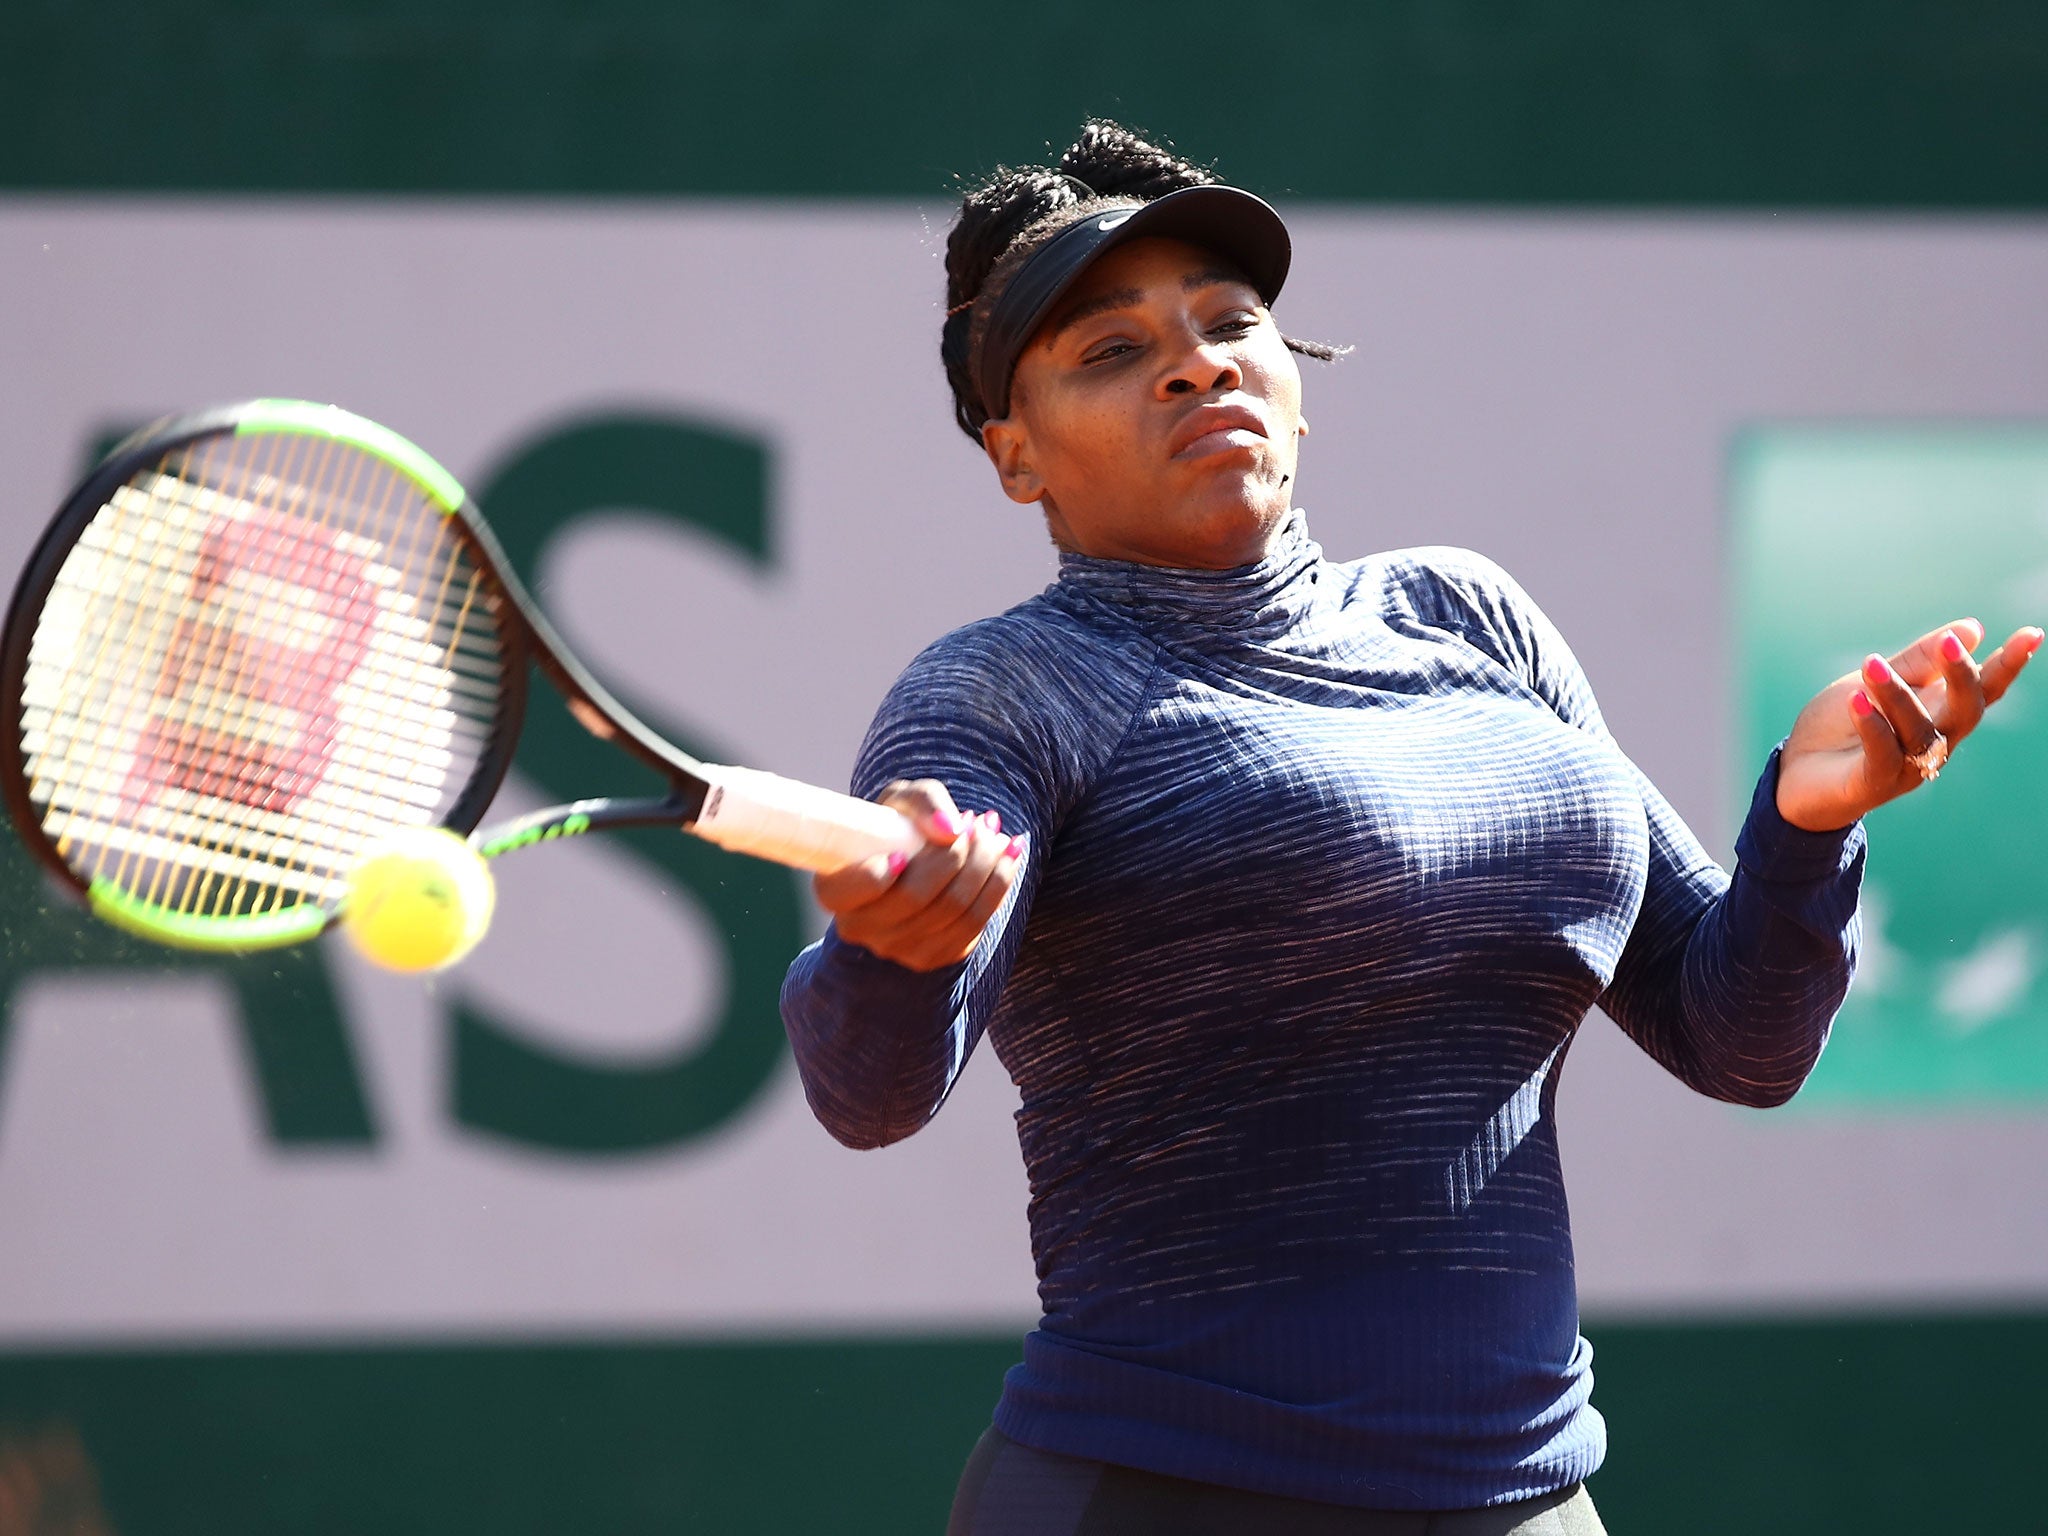 Williams is unseeded in Paris